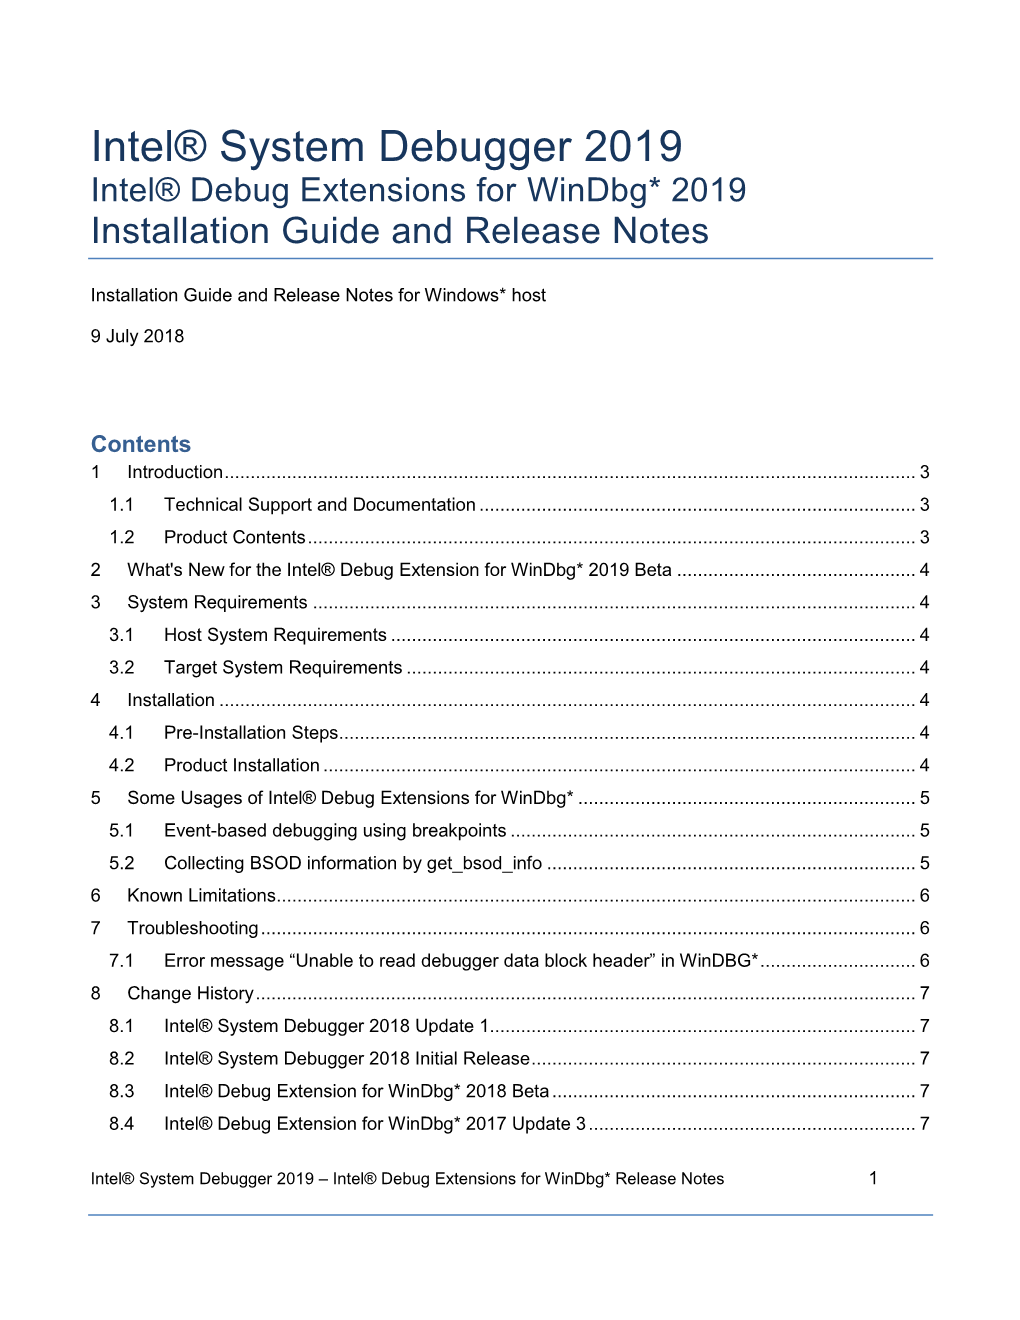 Intel® System Debugger 2019 Intel® Debug Extensions for Windbg* 2019 Installation Guide and Release Notes